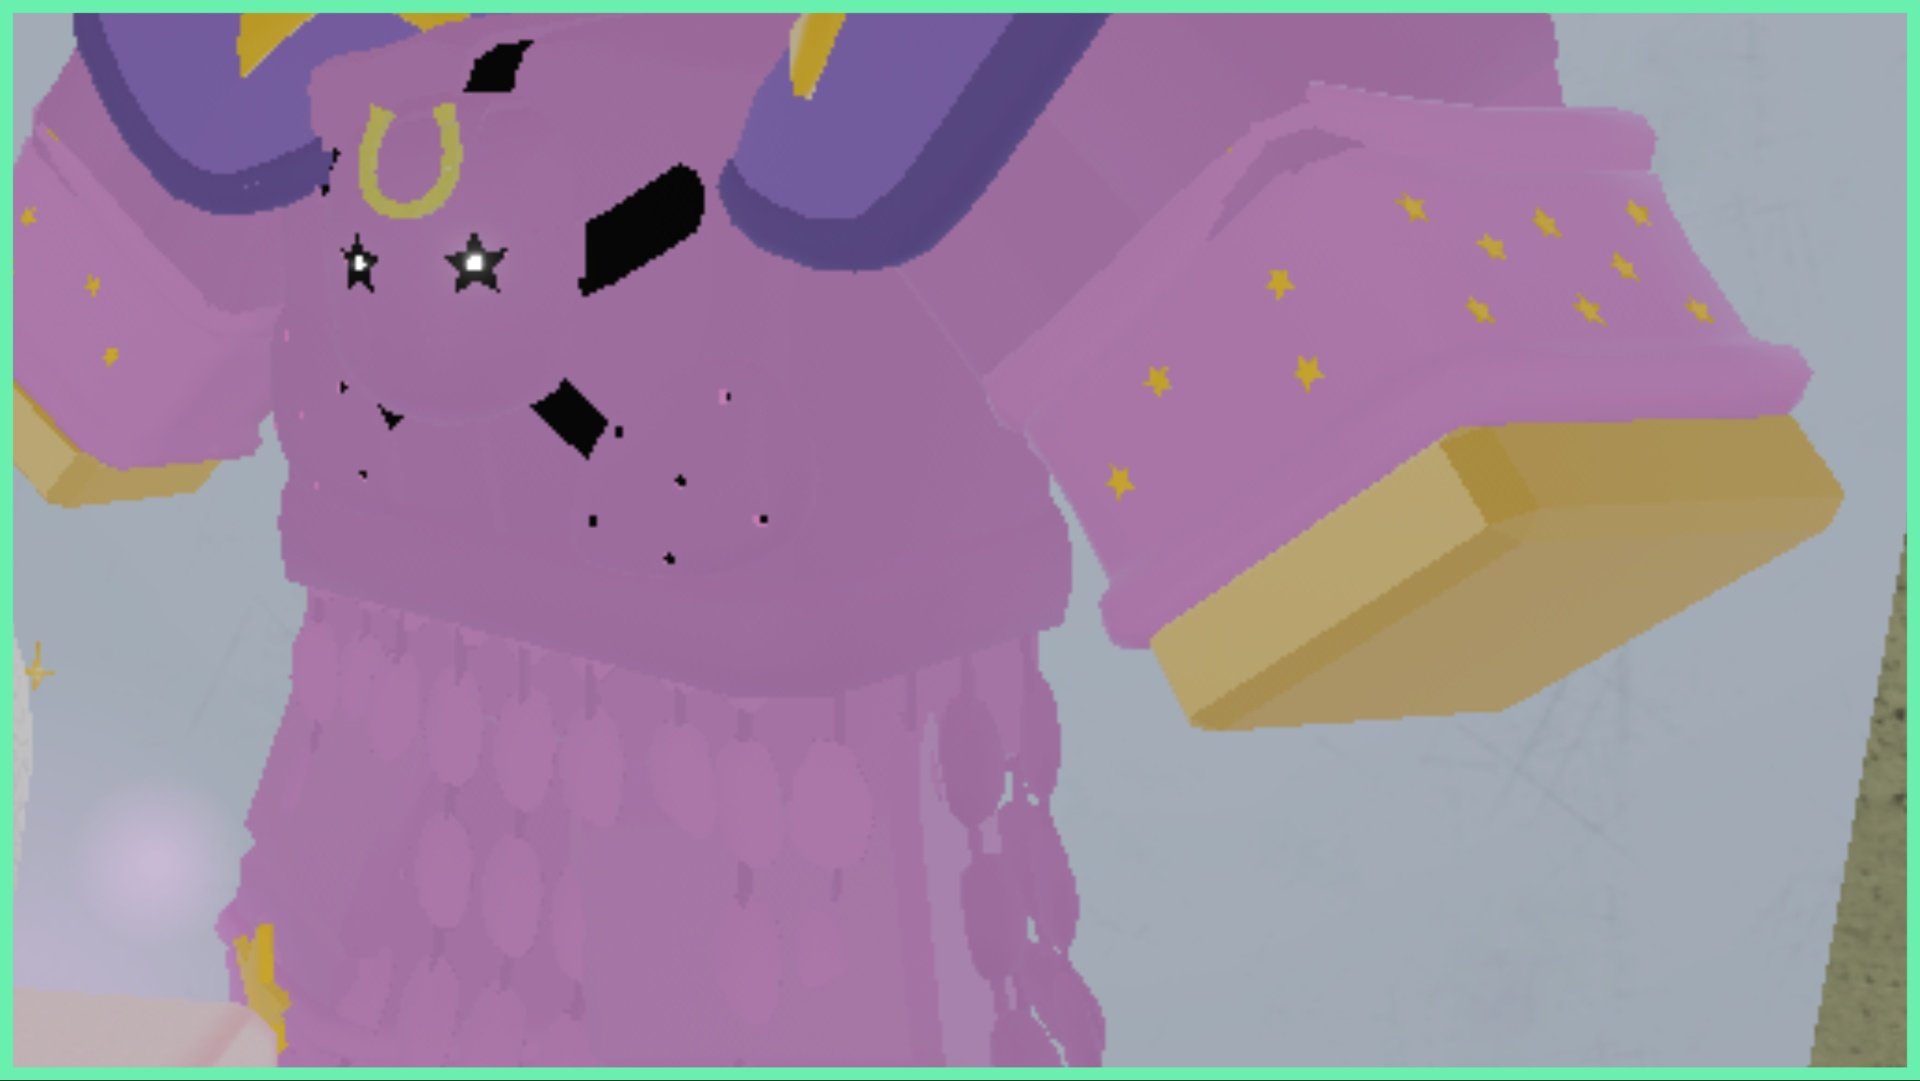 The image shows the Tusk Act 4 Stand which has a bulky roblox body build and is all pink with dotted golden stars on the arms. The stand is idle and facing a little to the left. Behind the stand is just a plain grey background